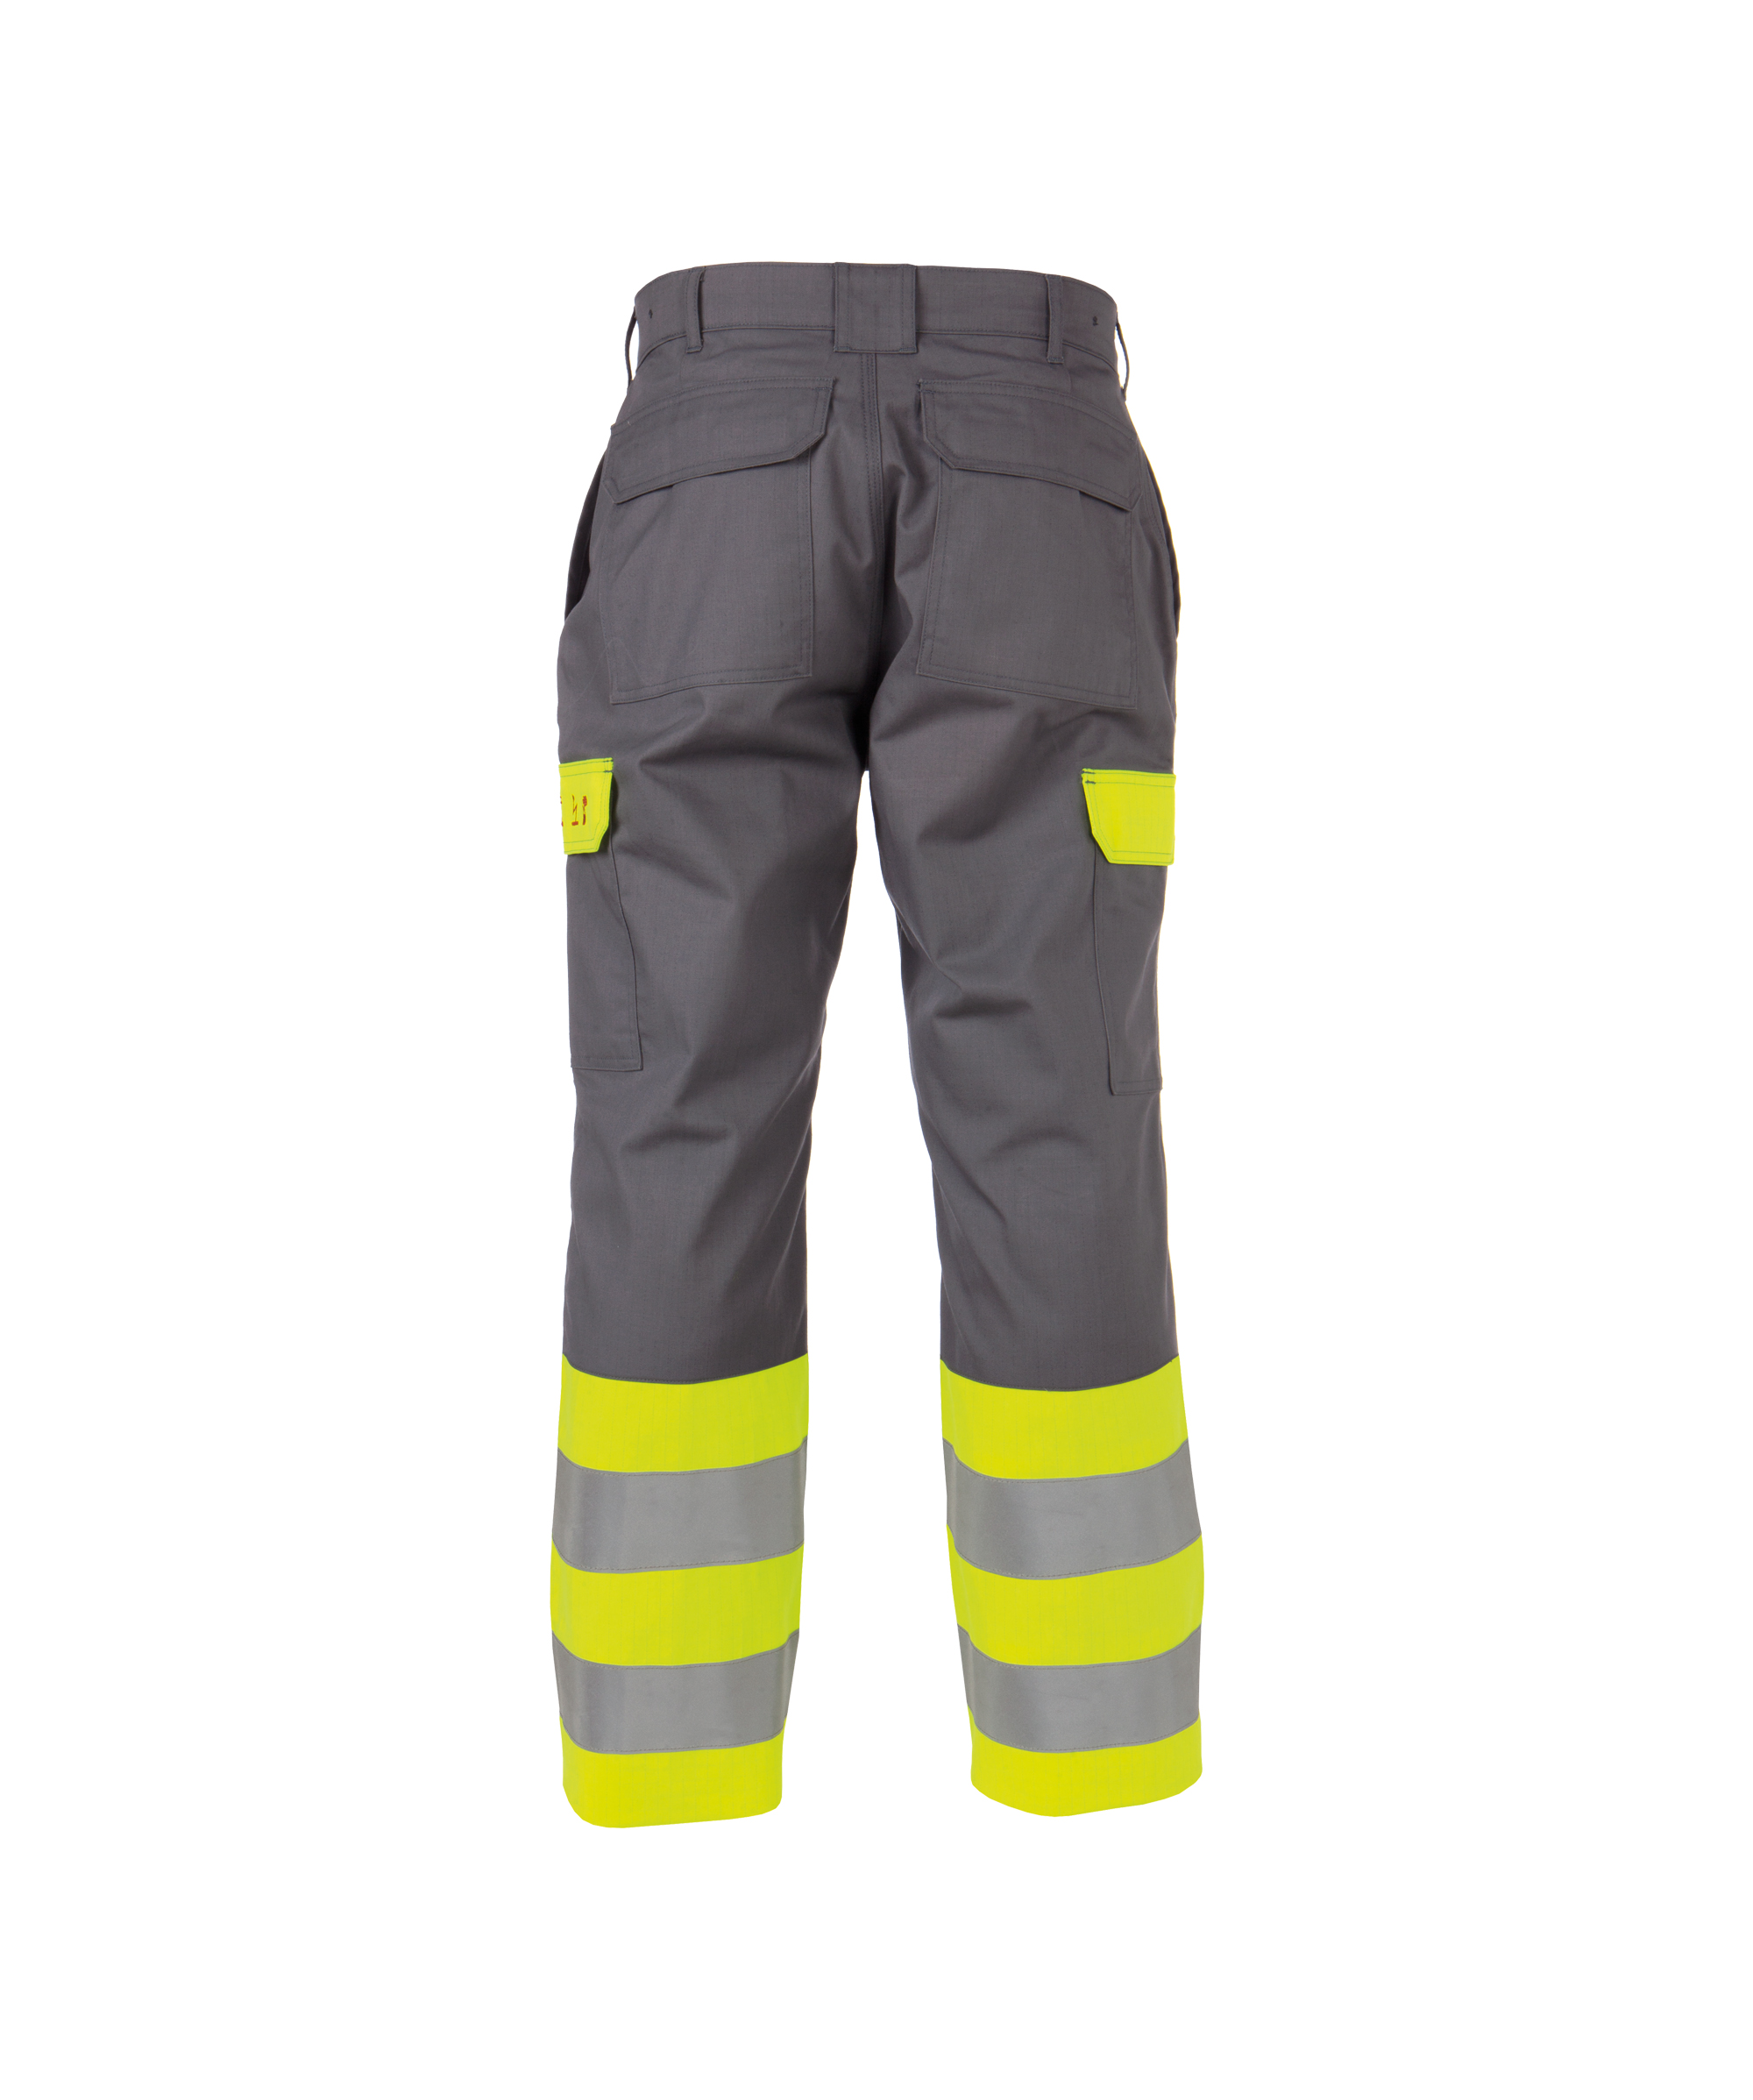 lenox_two-tone-multinorm-high-visibilty-work-trousers-with-knee-pockets_graphite-grey-fluo-yellow_back.jpg